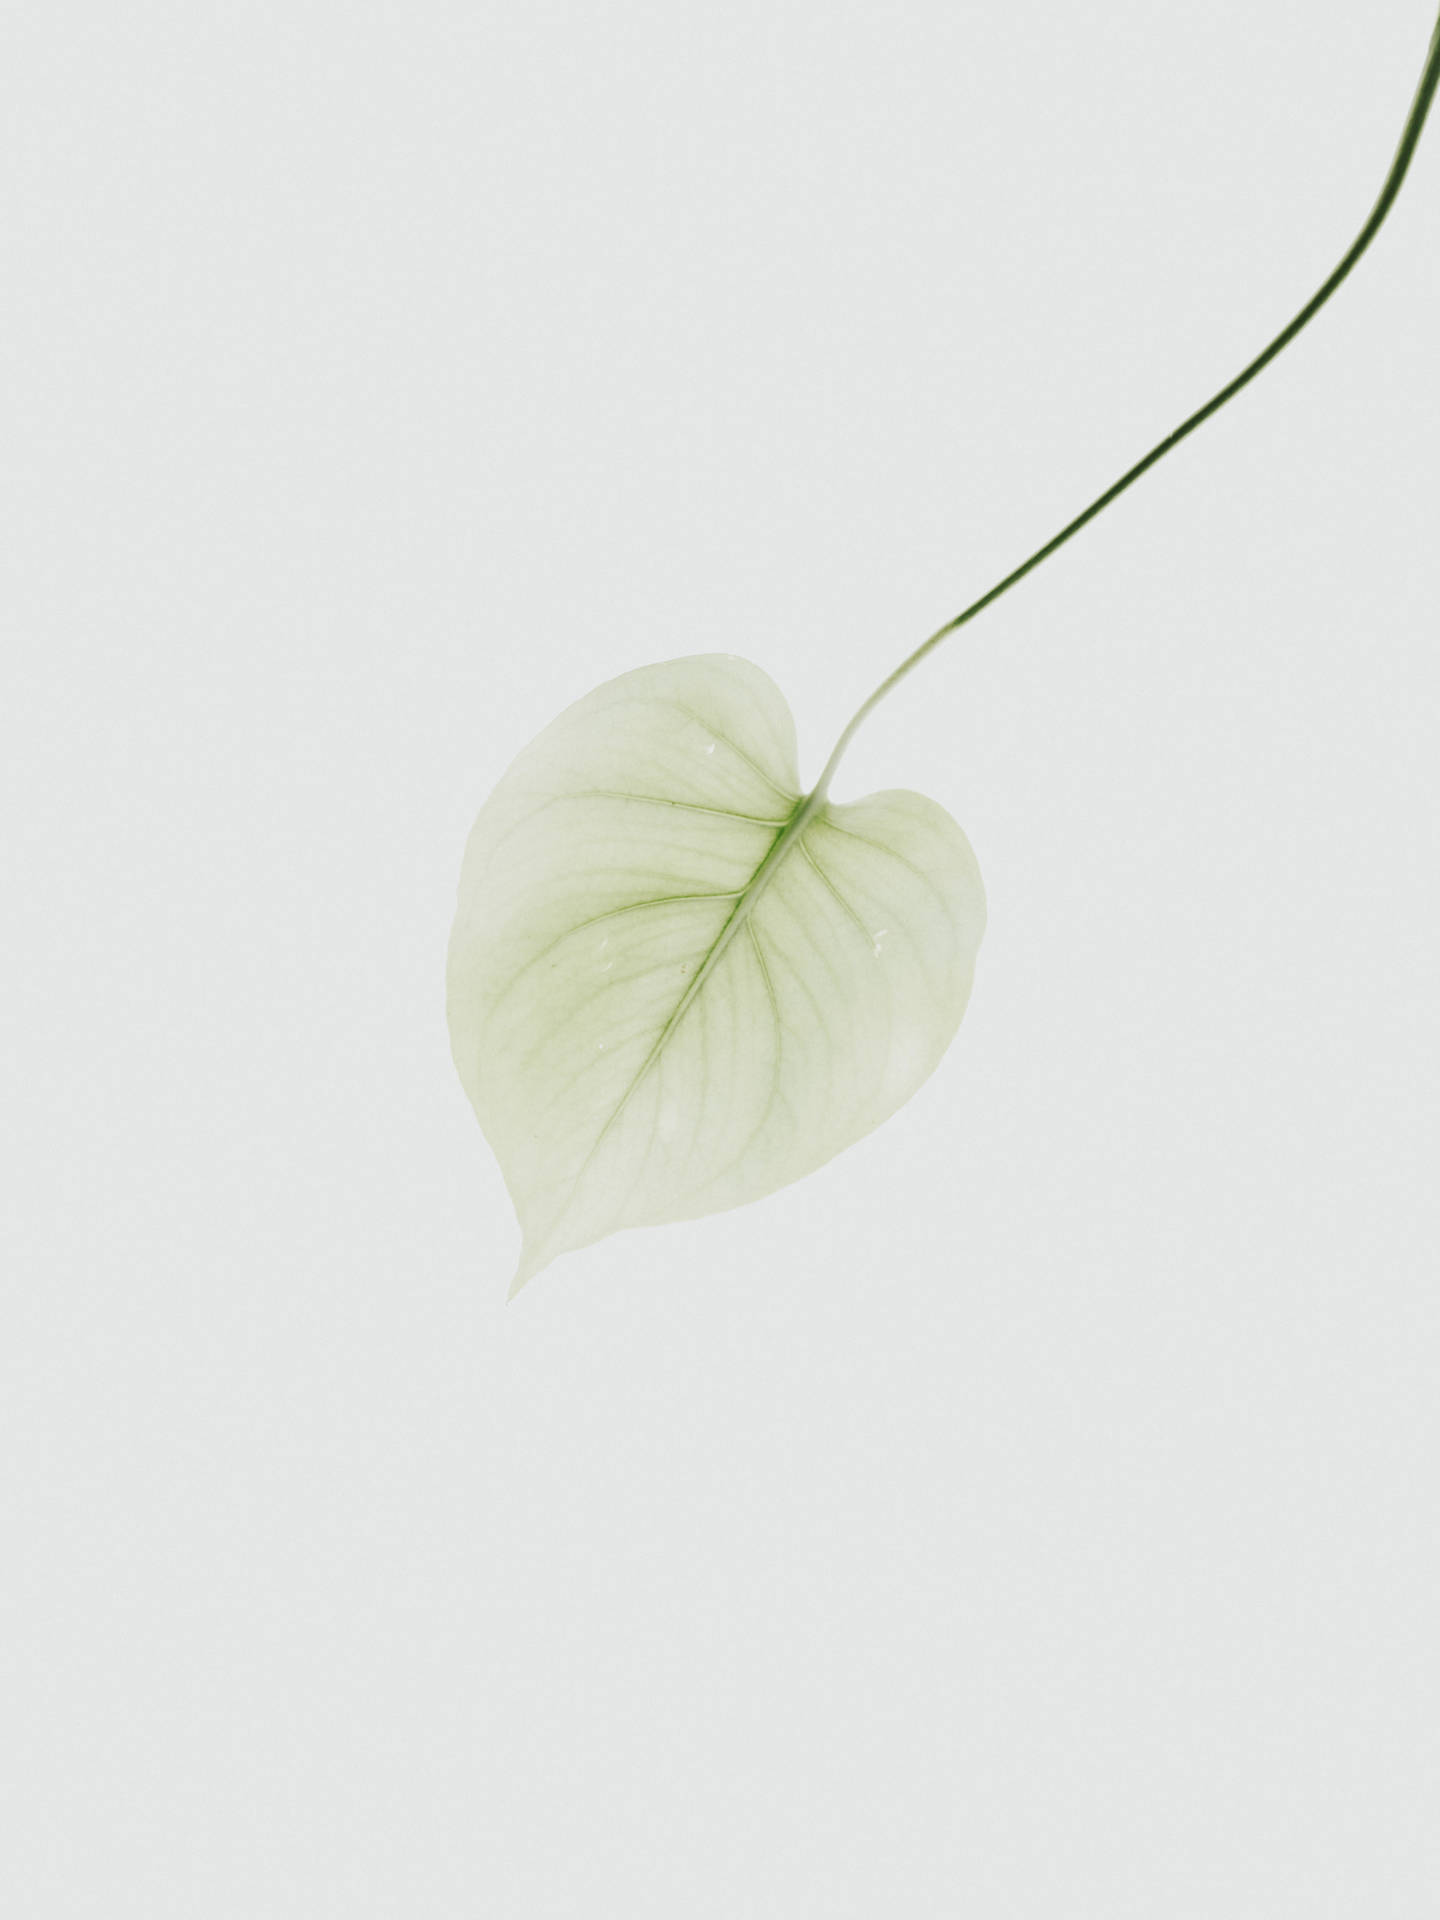 A Beautiful Transparent Leaf Showing Off Its Delicate Veins. Background